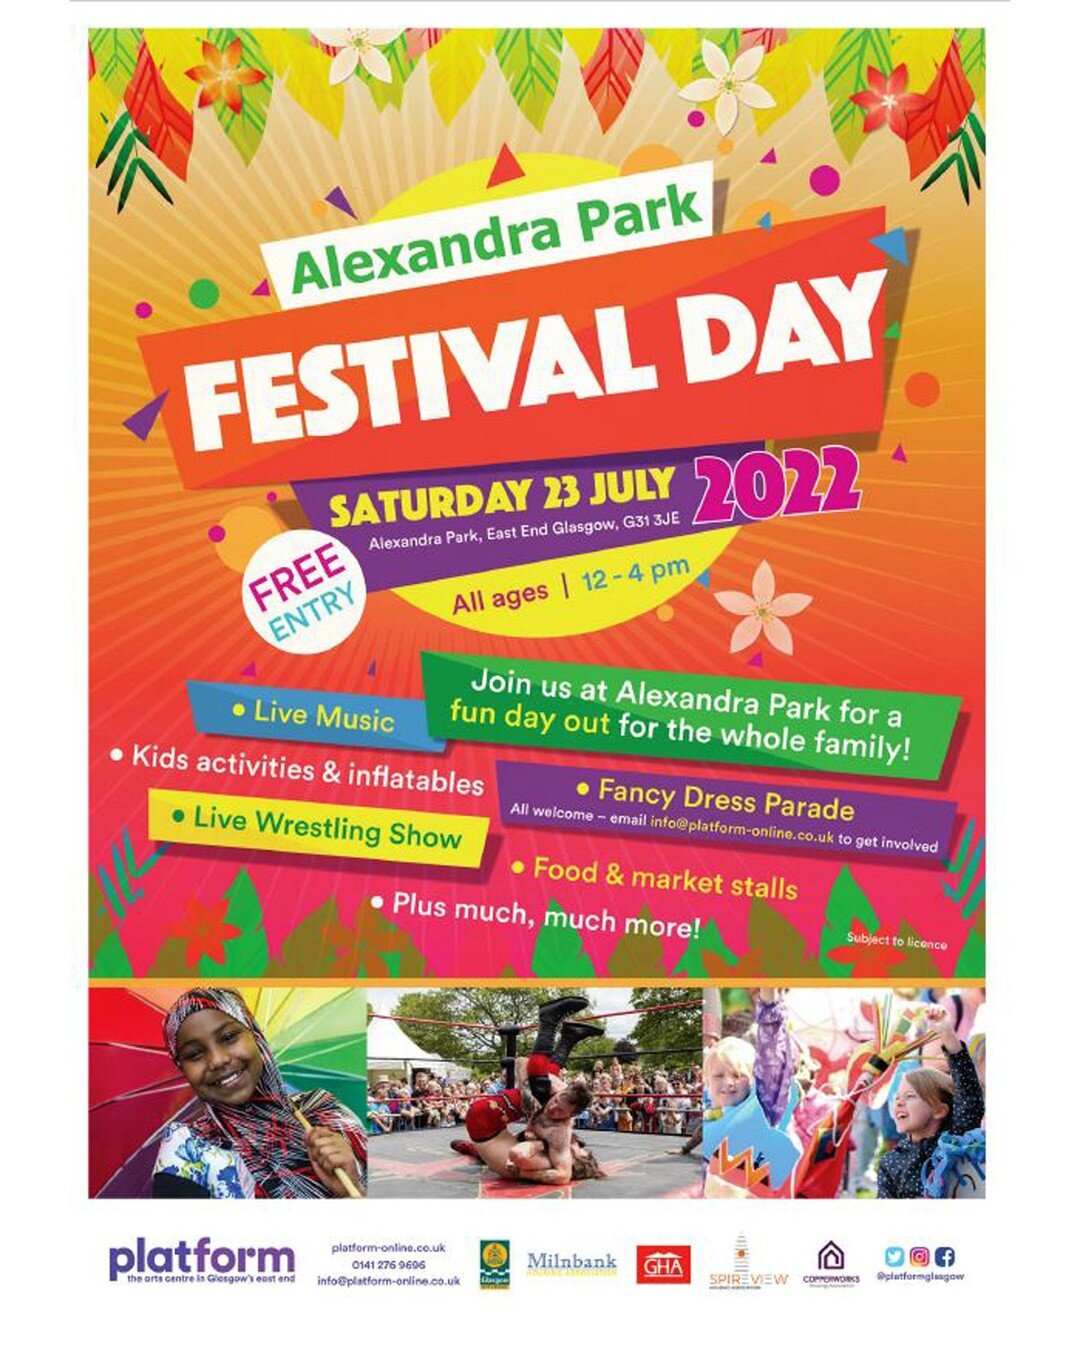 Next Saturday we'll be in the East End running a live printing stall at Alexandra Park Festival Day! You can come and print your own festival tote with us featuring a gorgeous design by @alicedanseyw and there'll be a kids activity table too. Thanks 